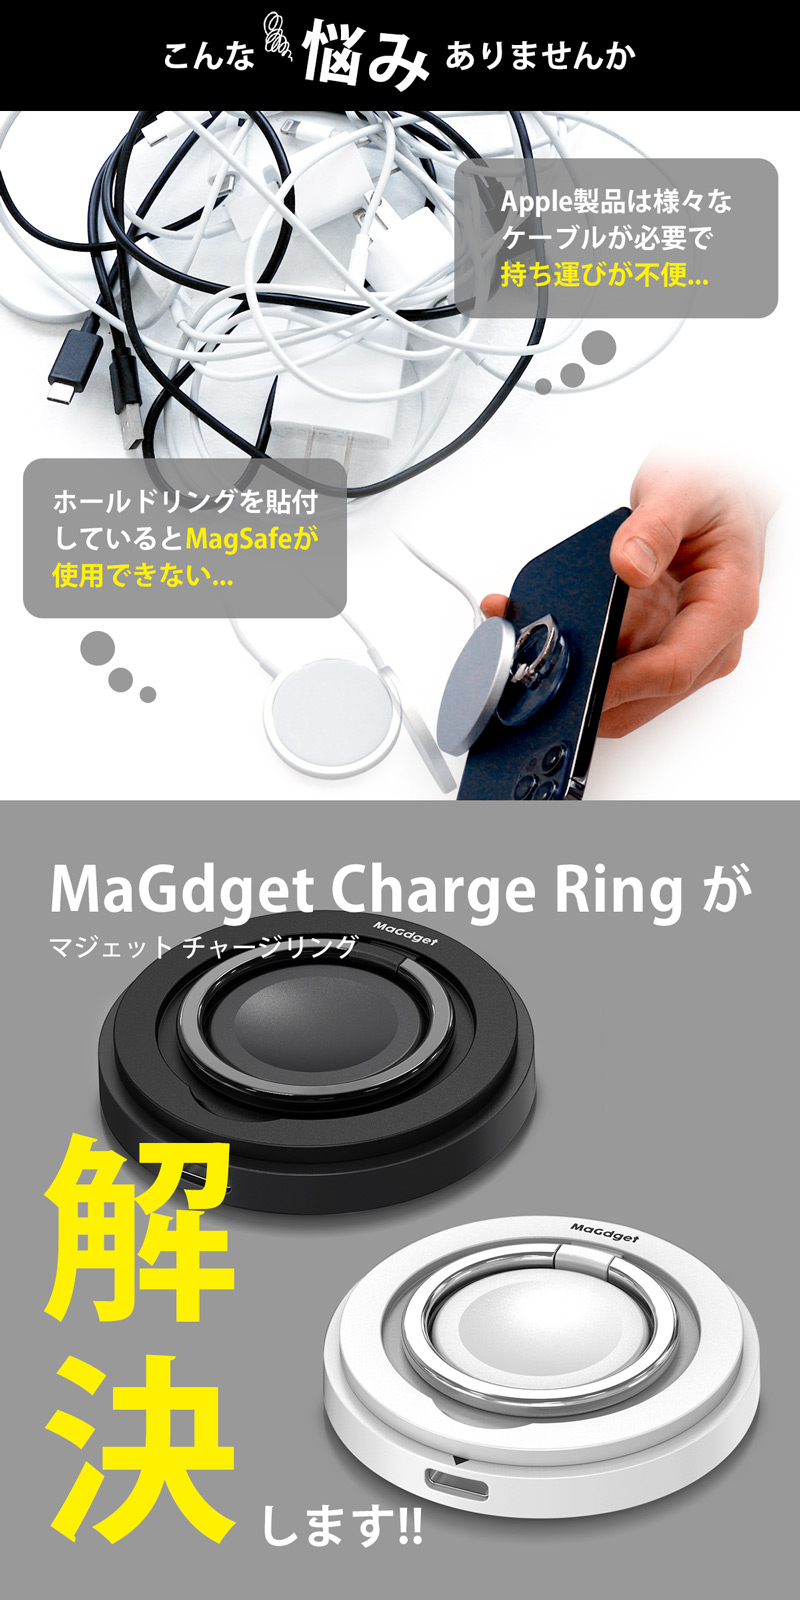 MaGdget Charge Ring マジェット チャージリング マグセーフ 充電器 